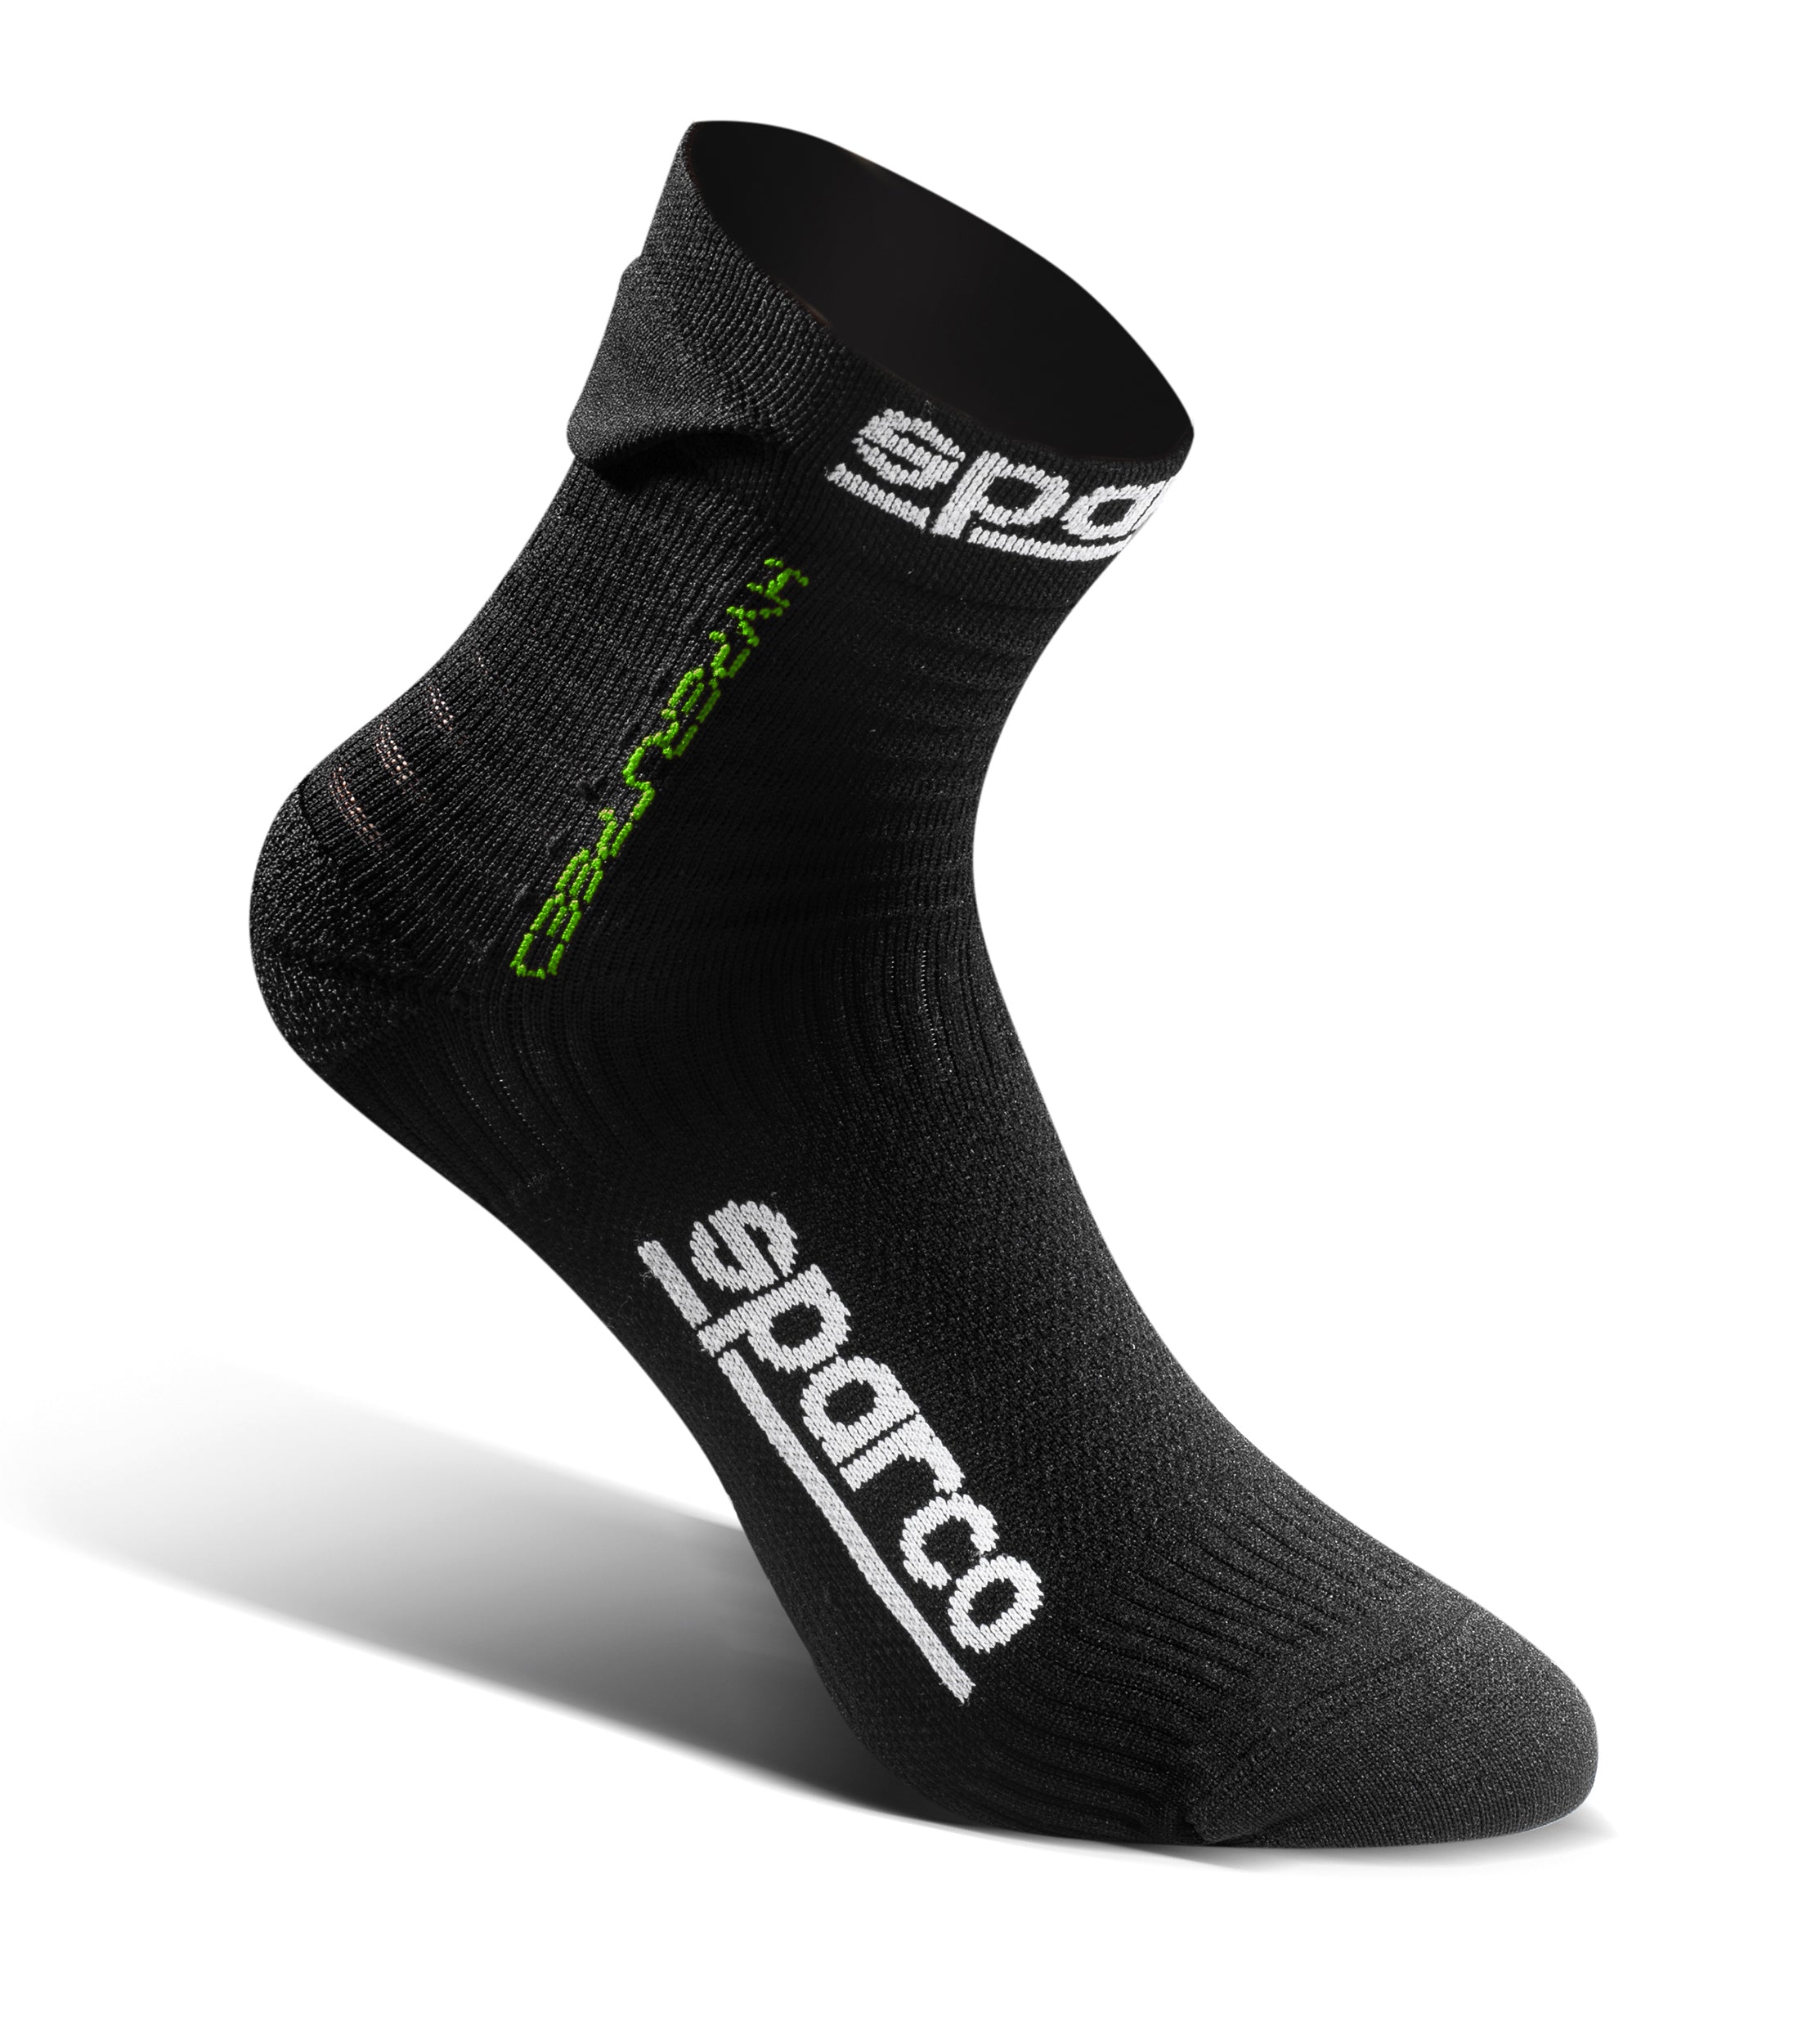 SPARCO 01290NRVF4445 Driving socks HYPERSPEED, black/green, size 44/45 Photo-1 